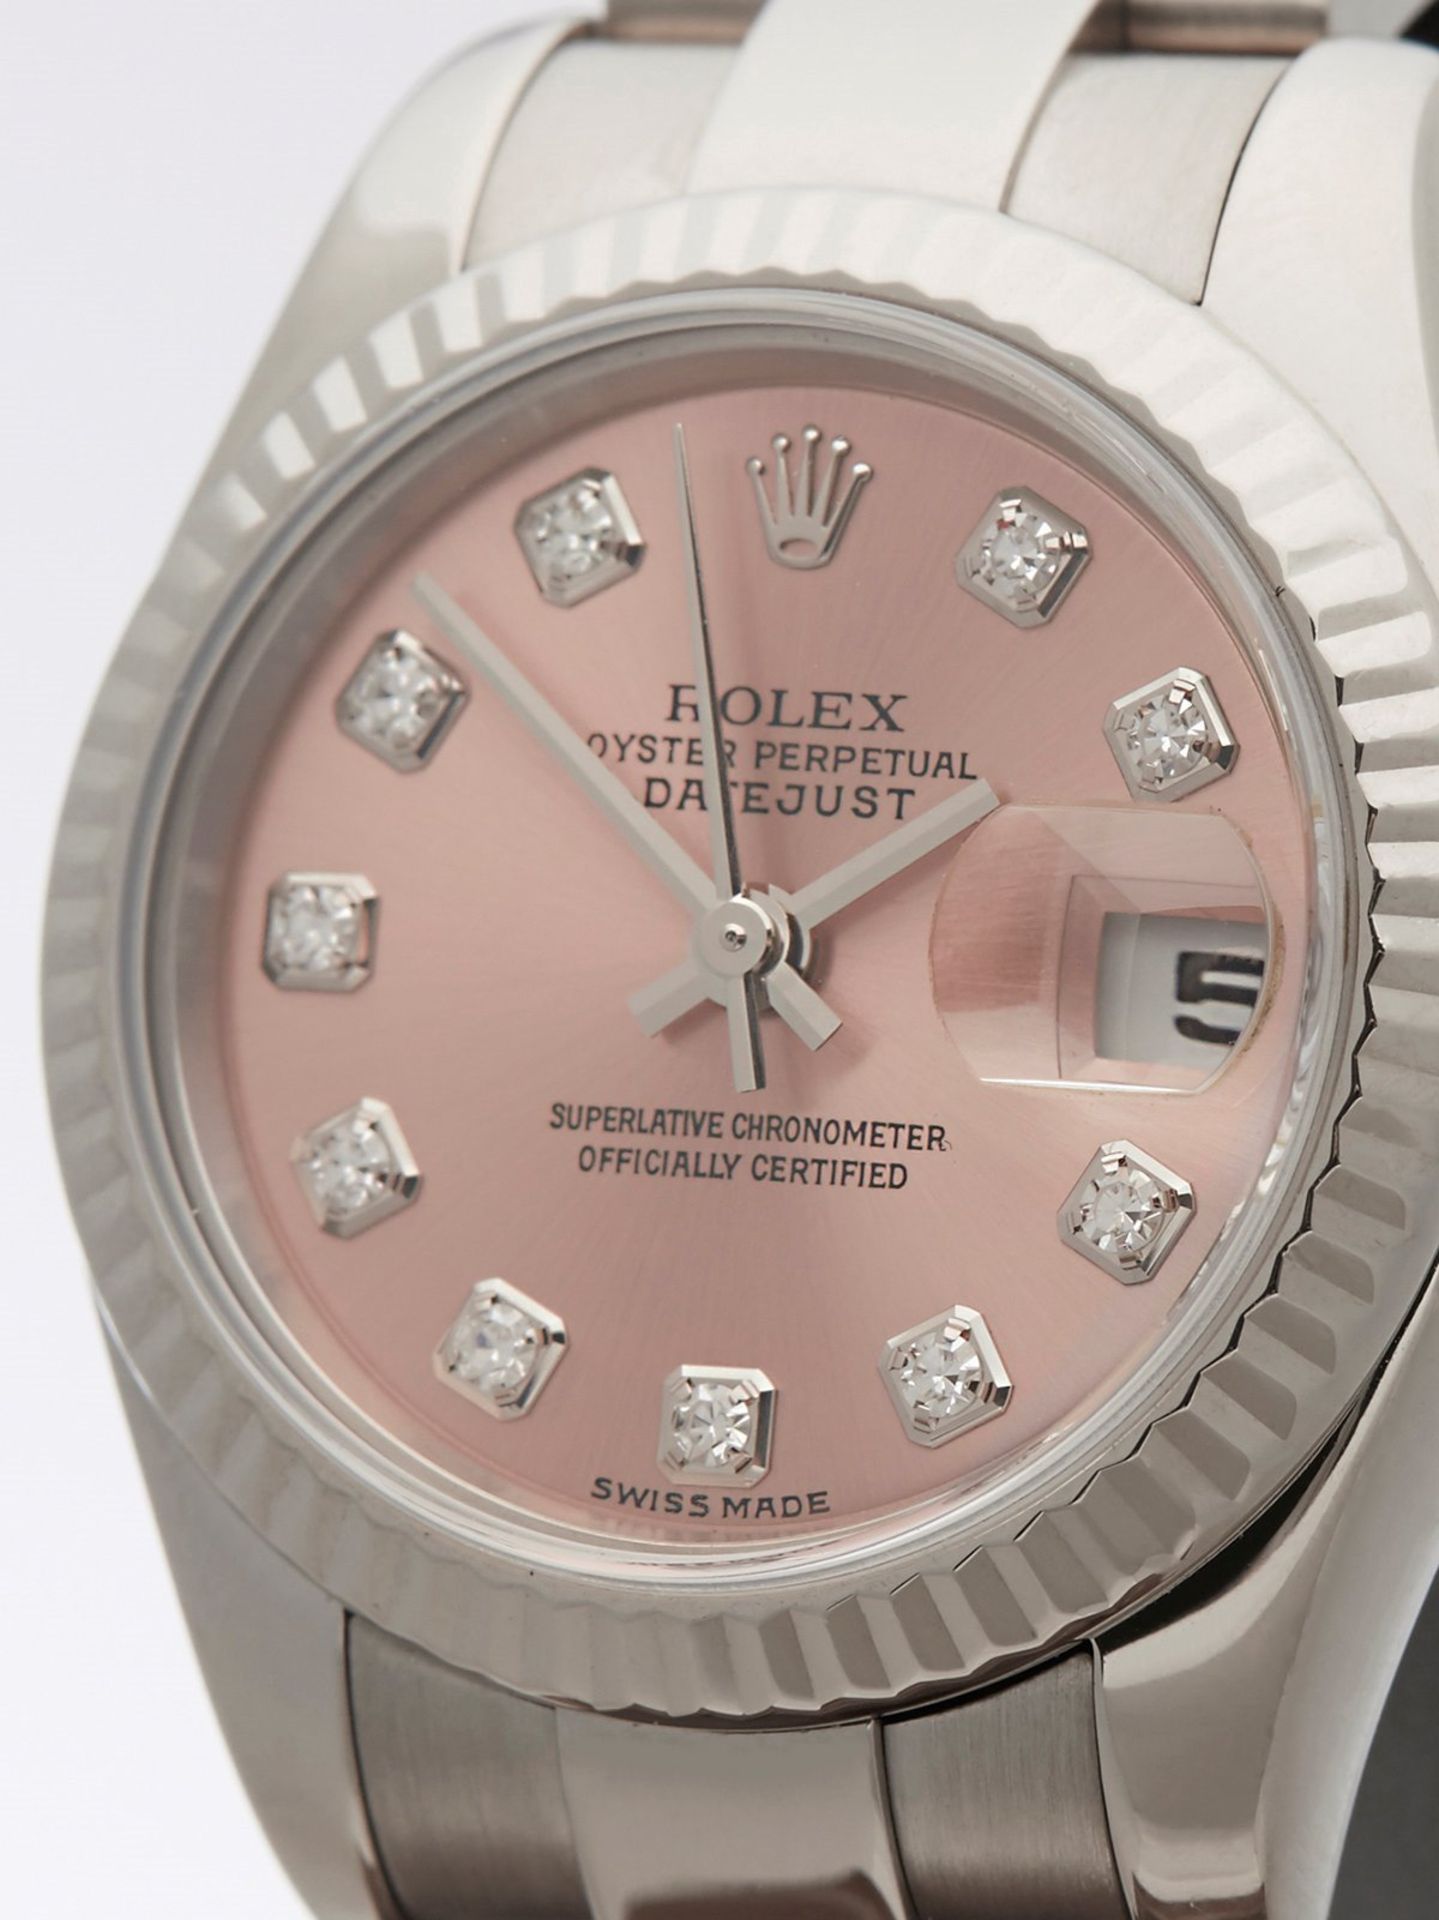 Rolex Datejust 26mm 18k White Gold 179179 - Image 3 of 9